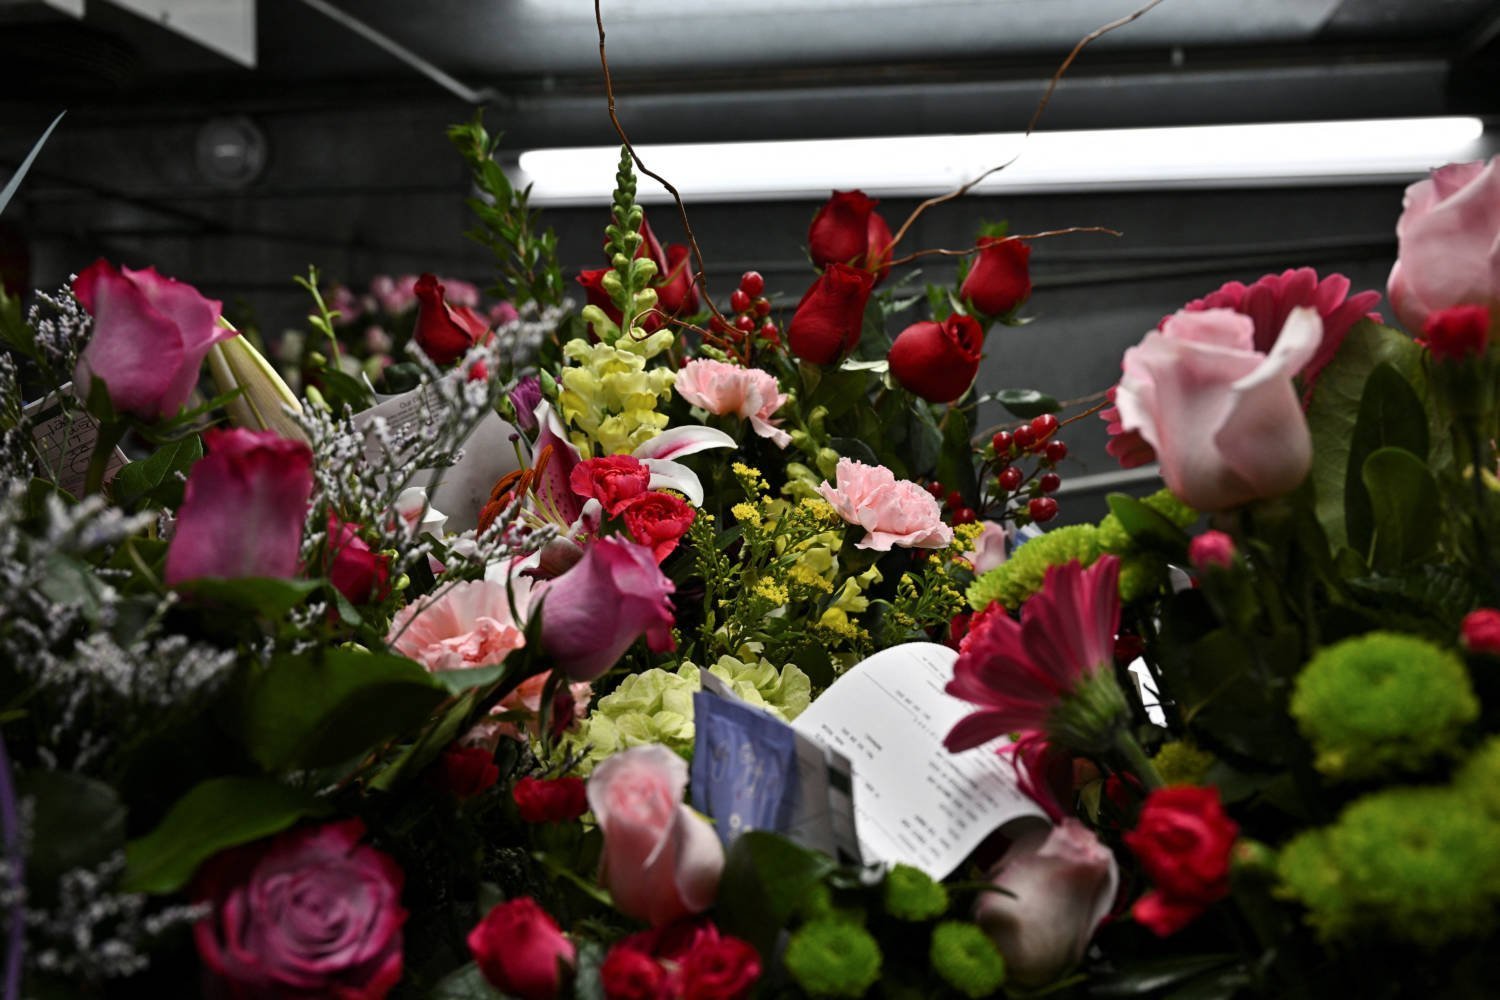 Florists Prepare Flowers For Valentine's Day Orders In Kentucky